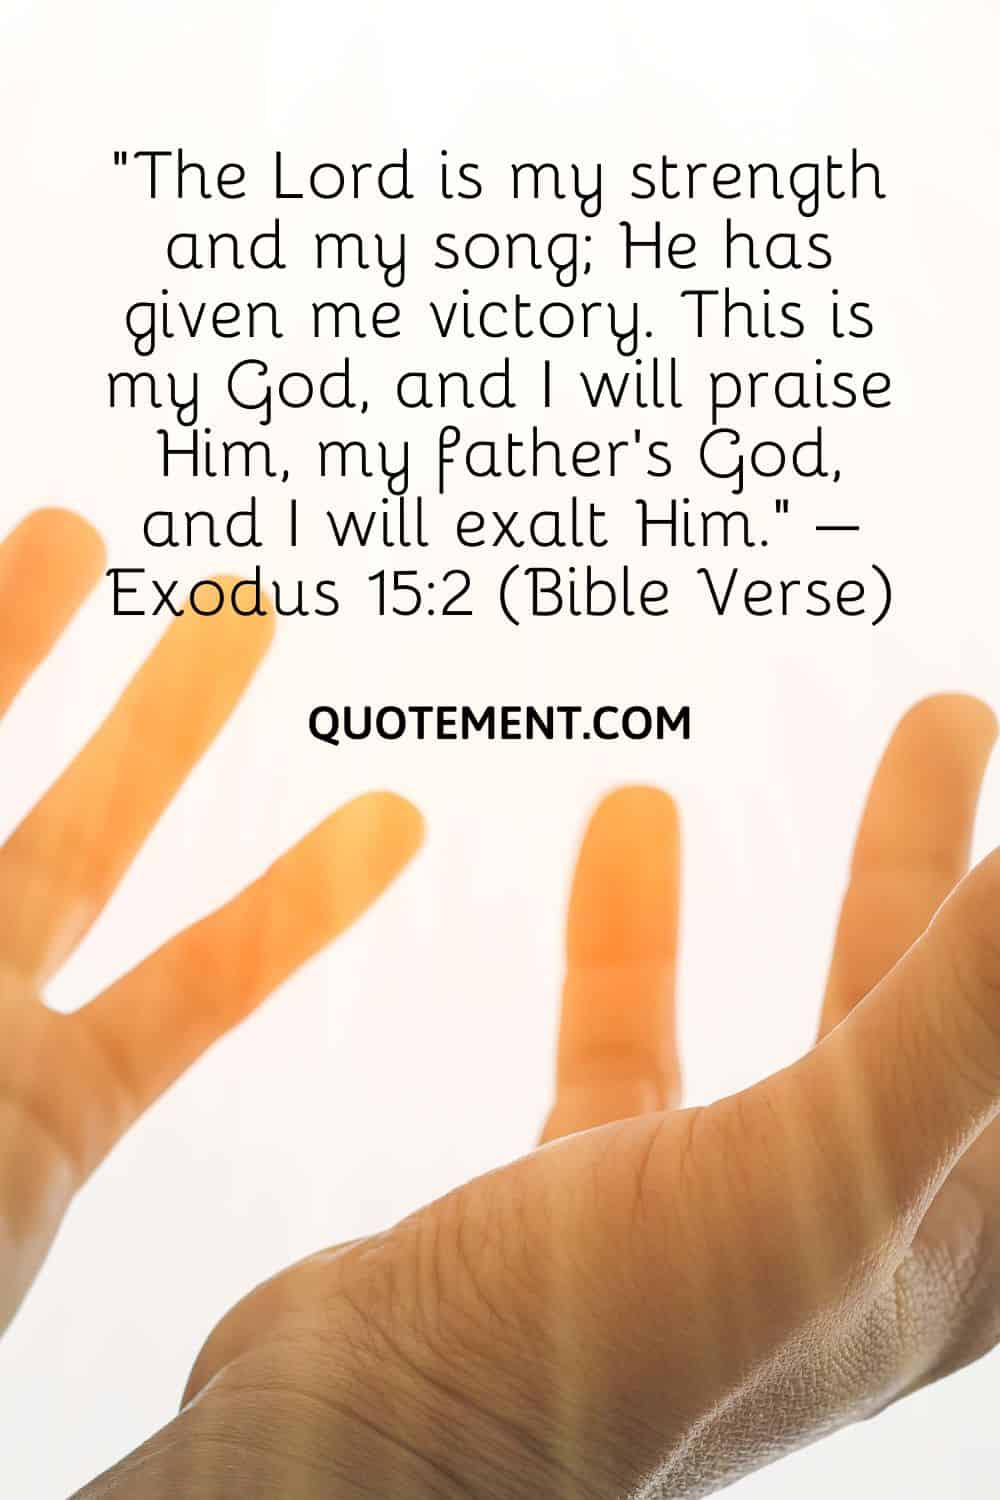 “The Lord is my strength and my song; He has given me victory. This is my God, and I will praise Him, my father’s God, and I will exalt Him.” – Exodus 152 (Bible Verse)